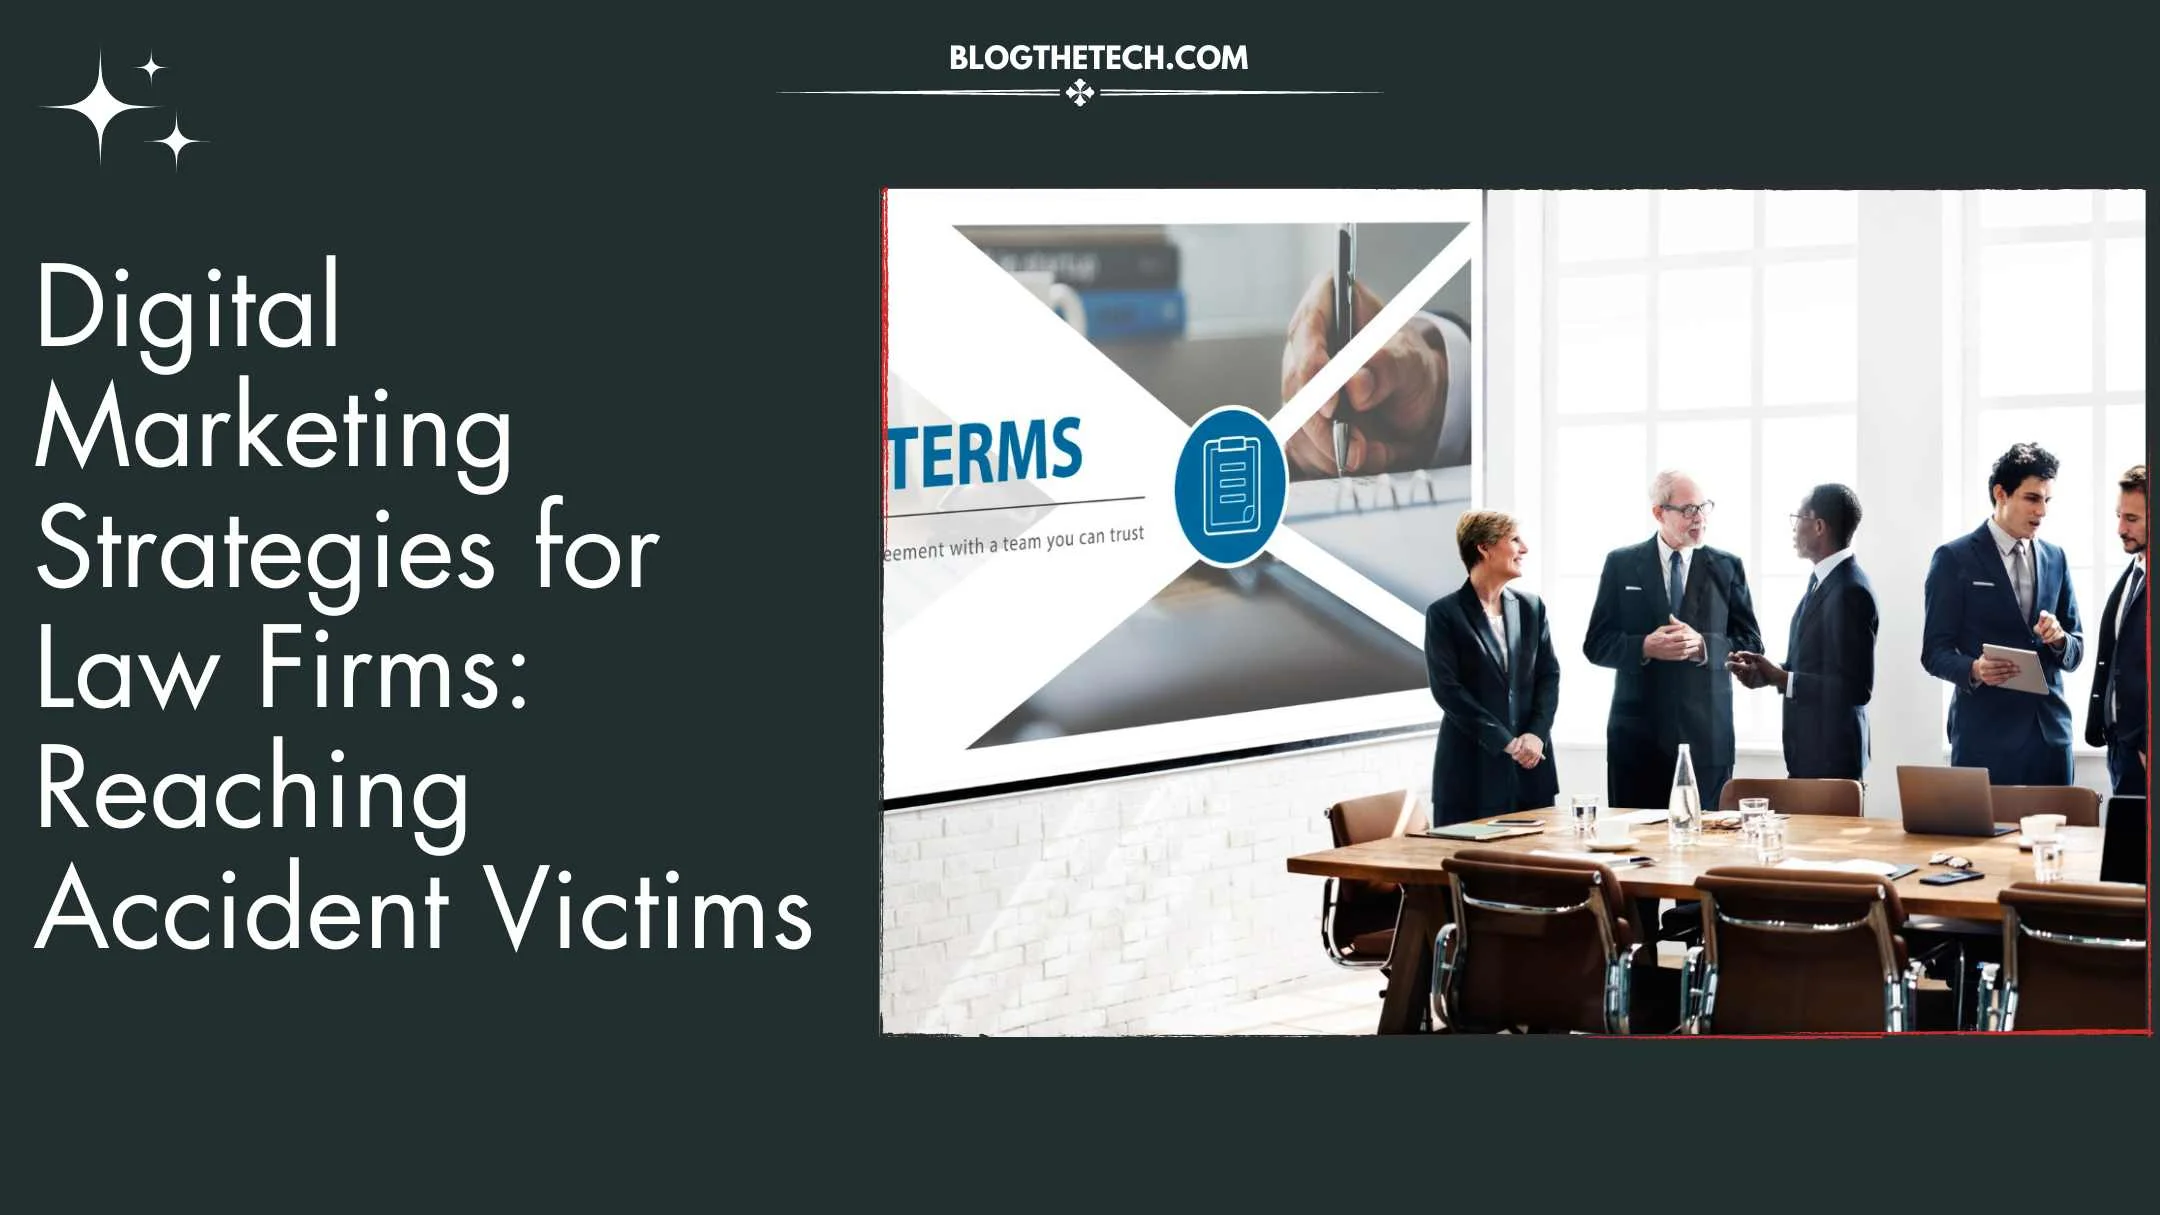 Digital Marketing Strategies for Law Firms - Reaching Accident Victims